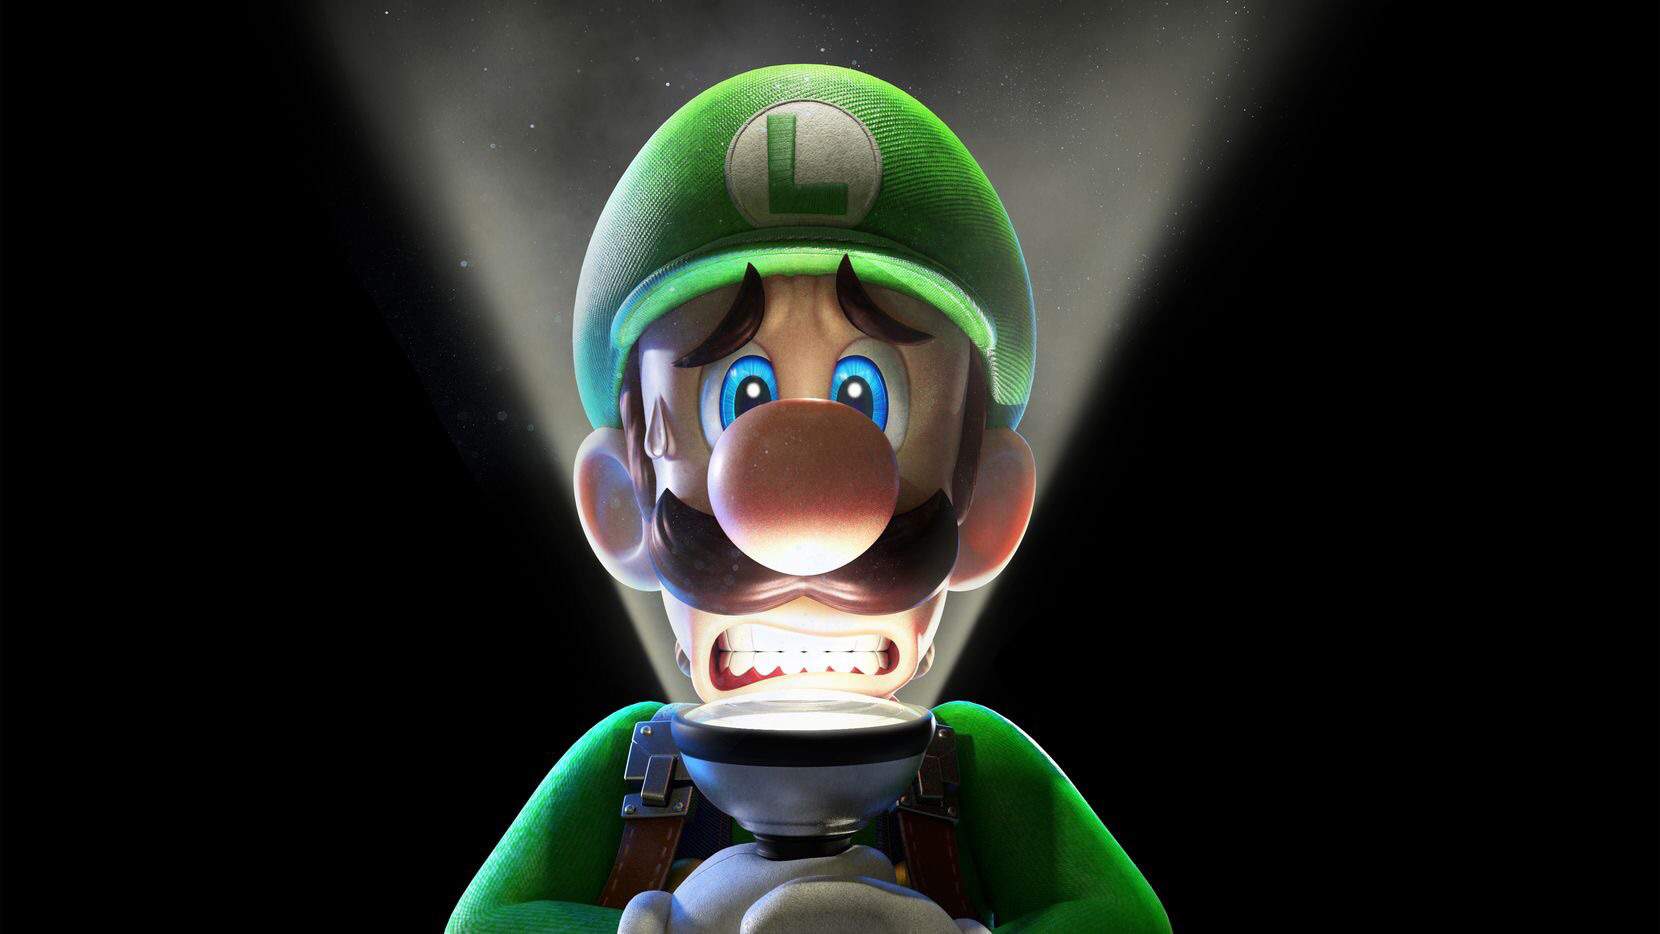 what is the best luigi's mansion game